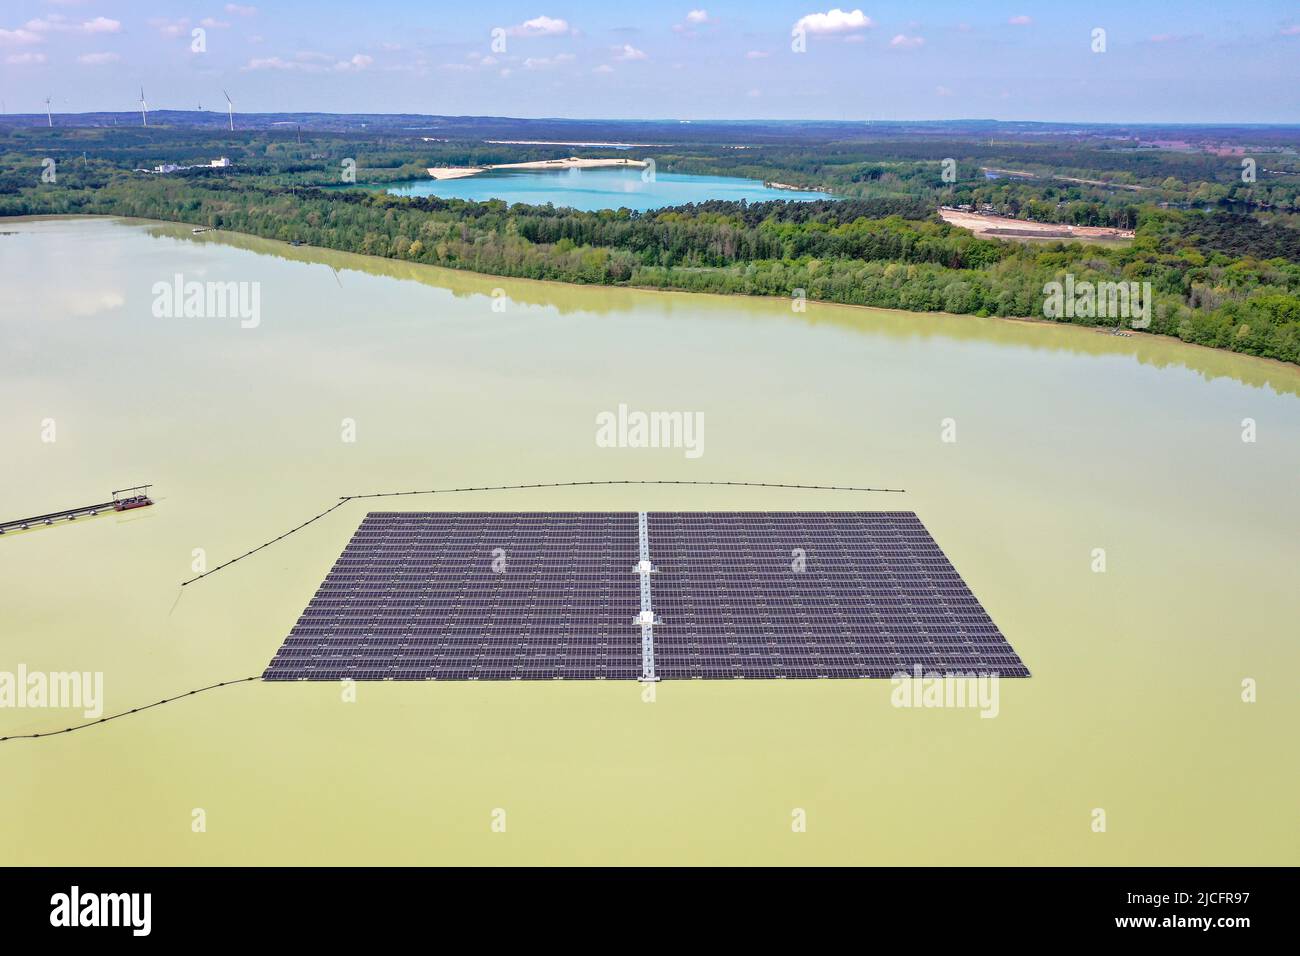 Haltern am See, North Rhine-Westphalia, Germany - Germany's largest floating solar park. 5, 800 photovoltaic elements produce 3 million kilowatt hours of electricity from solar energy every year. Stock Photo